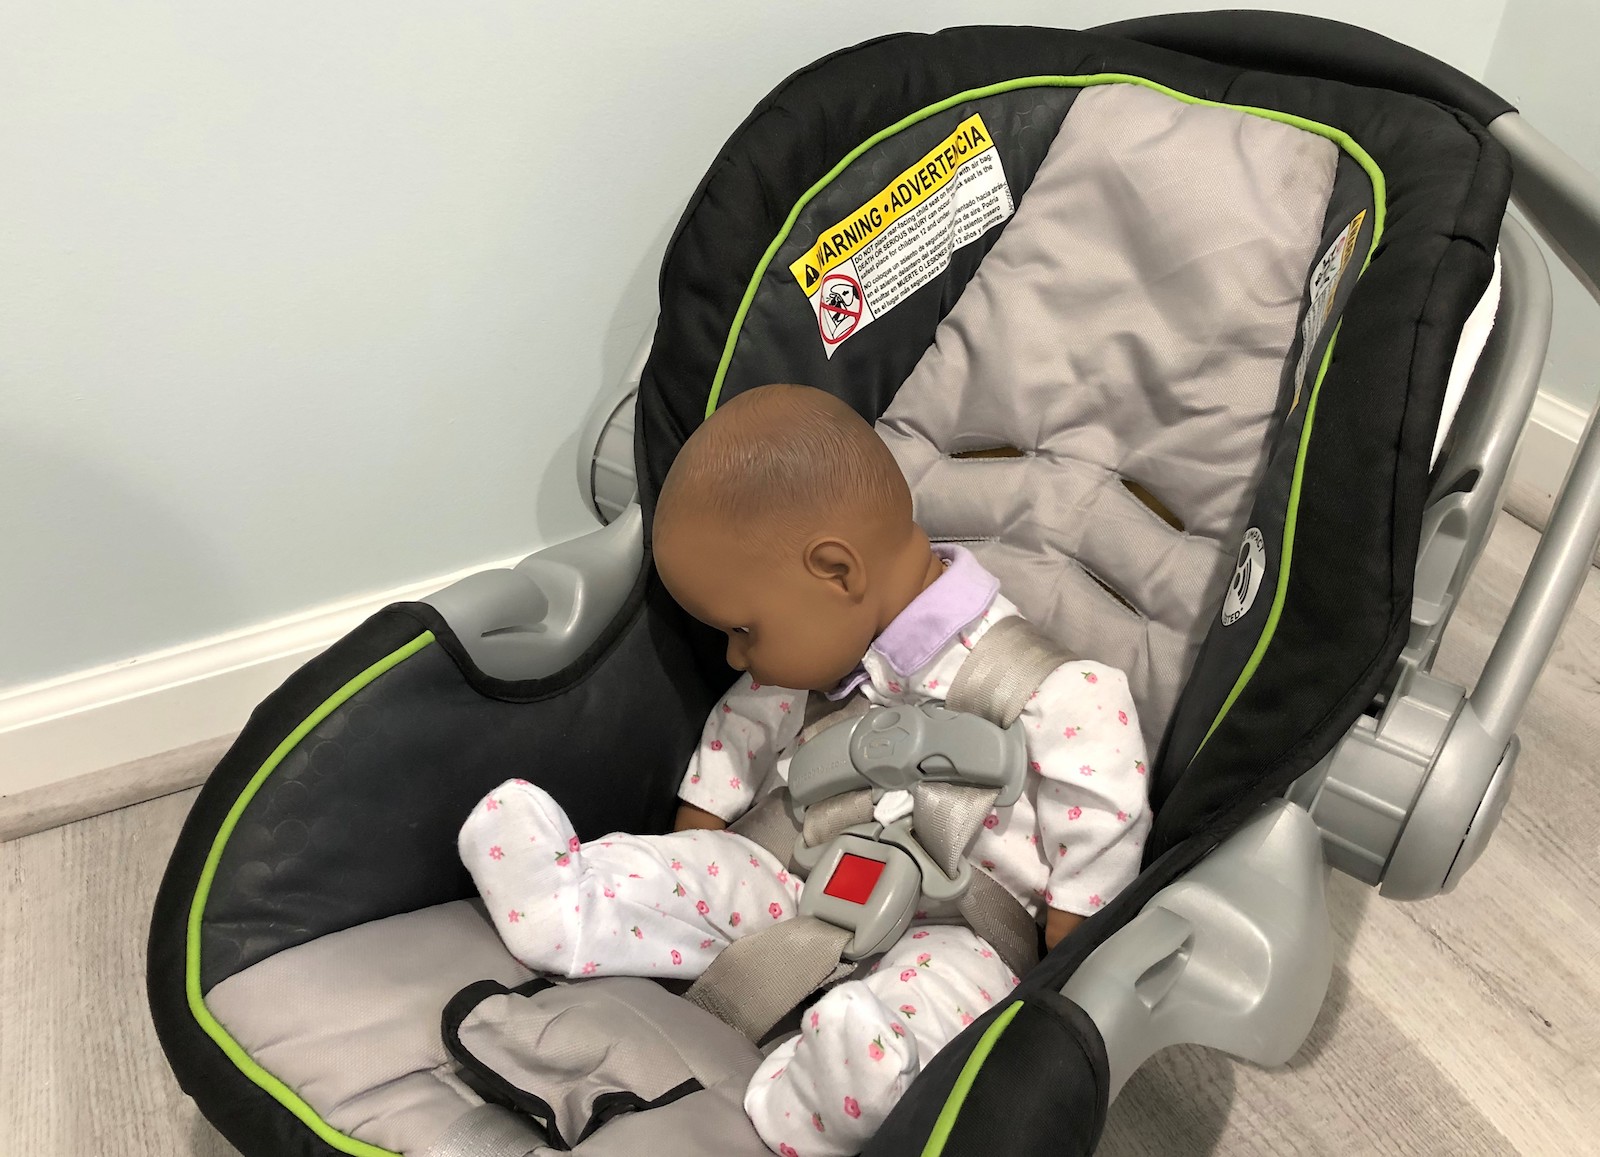 A baby sits in a car seat, with its head towards its chest, which can cause positional asphyxia: a blockage of the infant's airway.